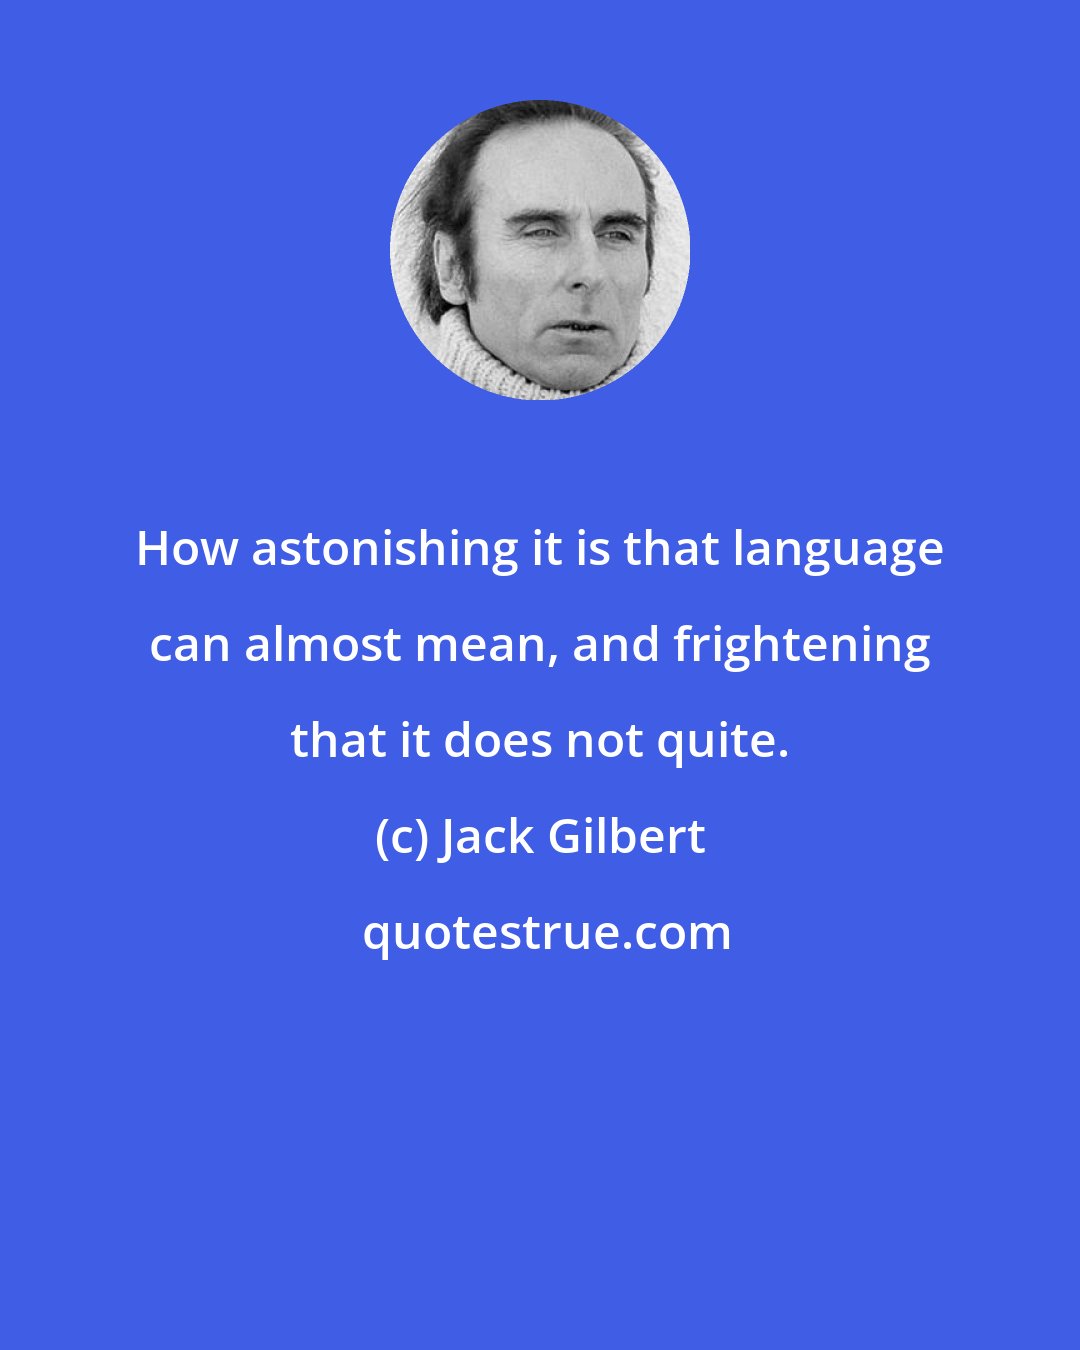 Jack Gilbert: How astonishing it is that language can almost mean, and frightening that it does not quite.